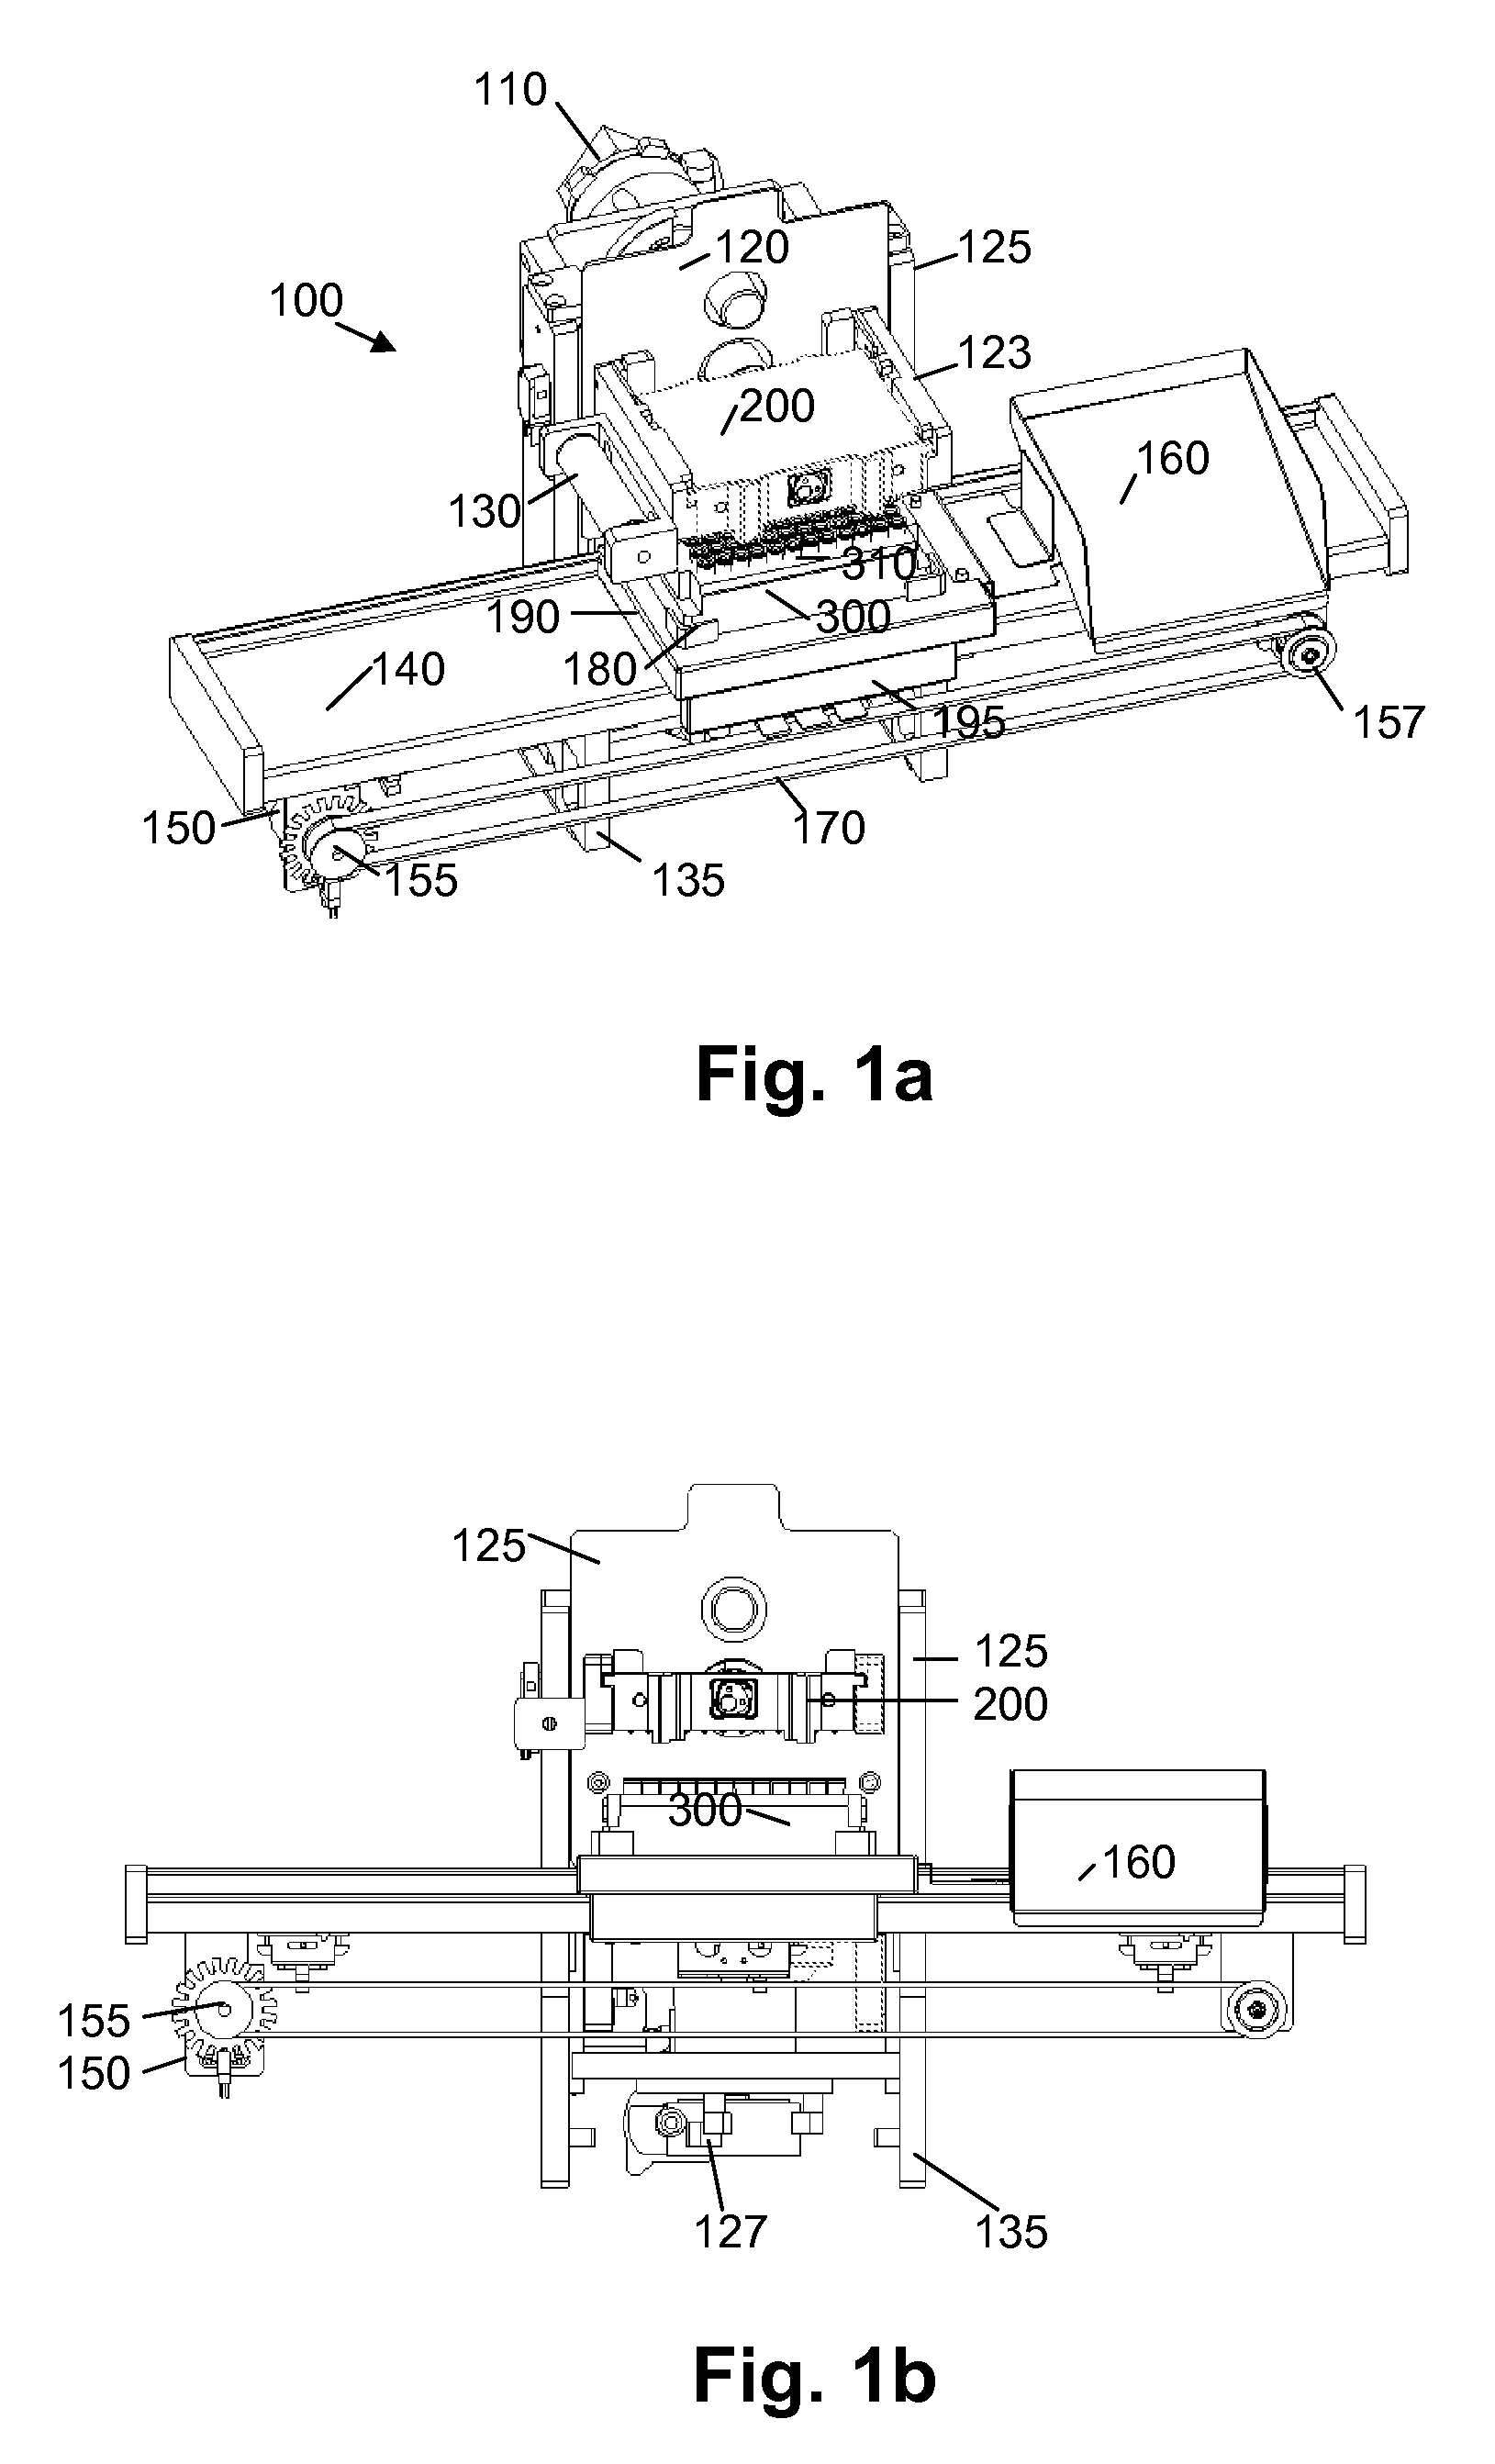 System and method for simultaneous capping/de-capping of storage containers in an array